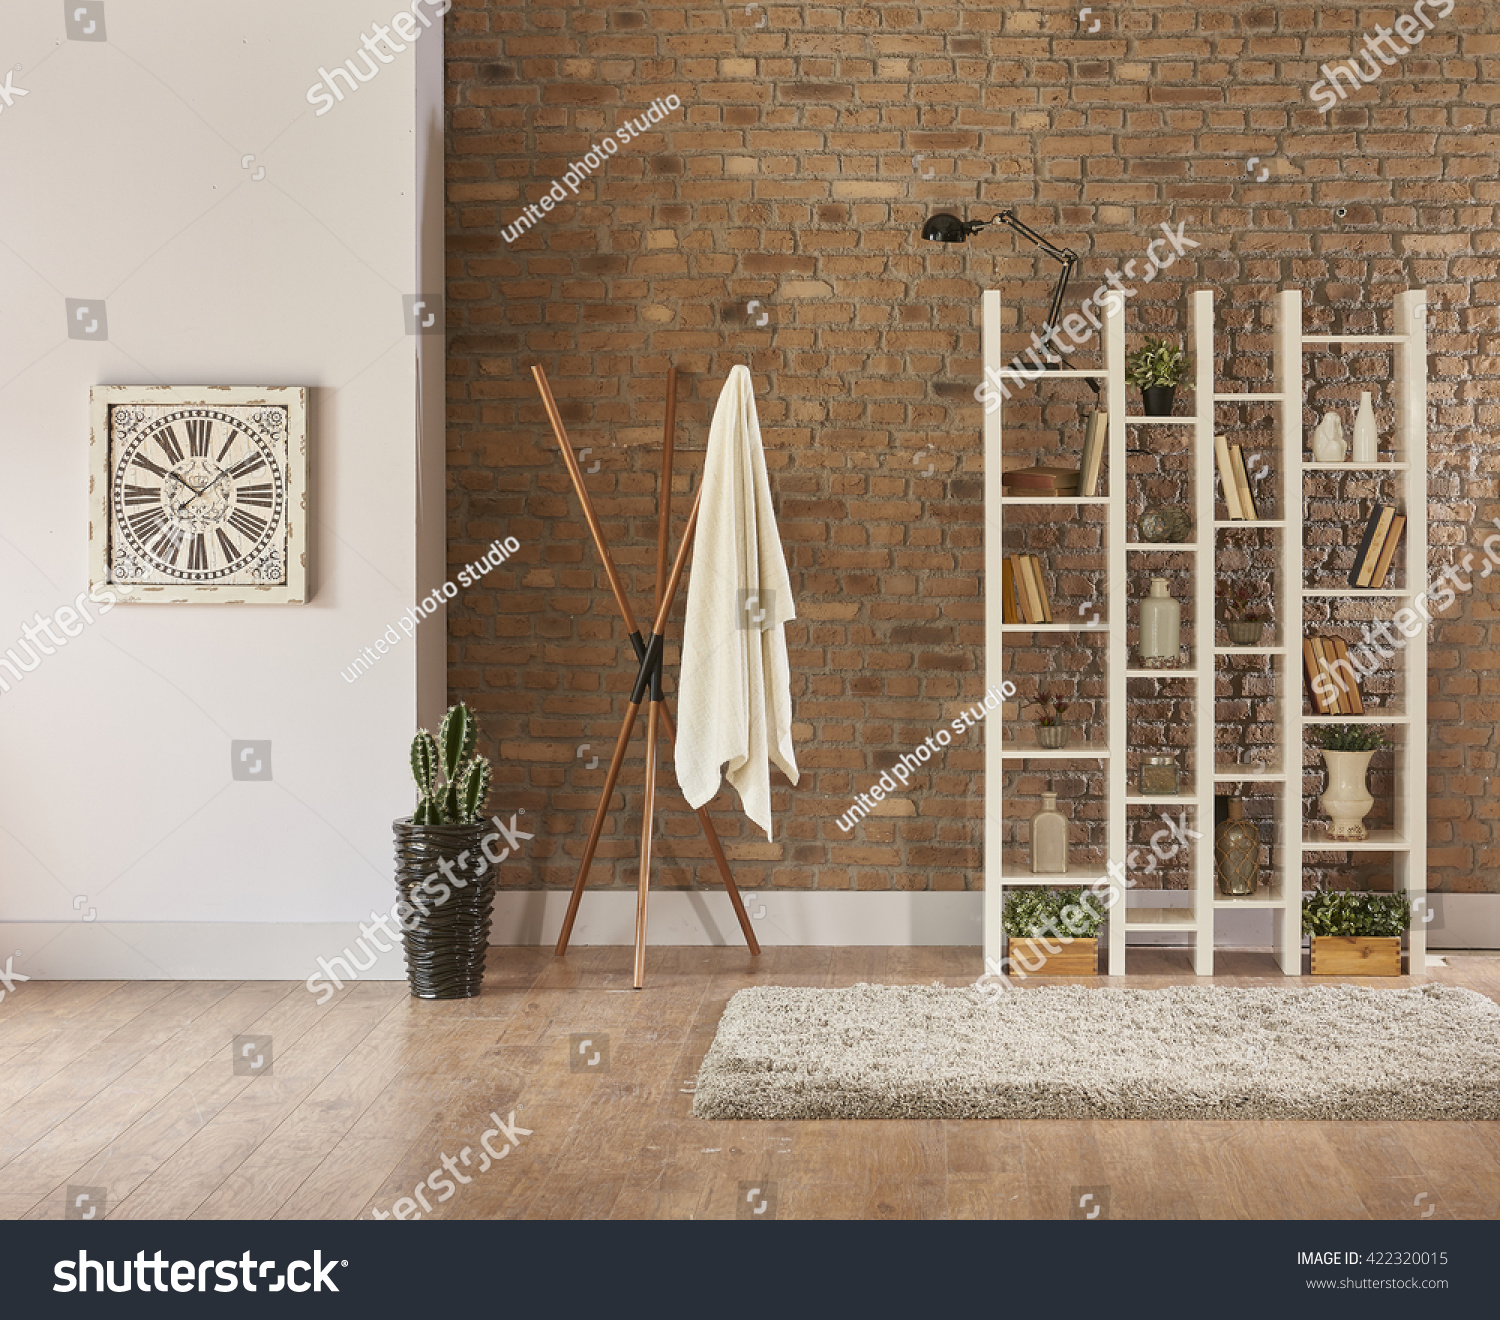 Living Room Interior Bookshelf Behind Natural Brick Wall Concept With